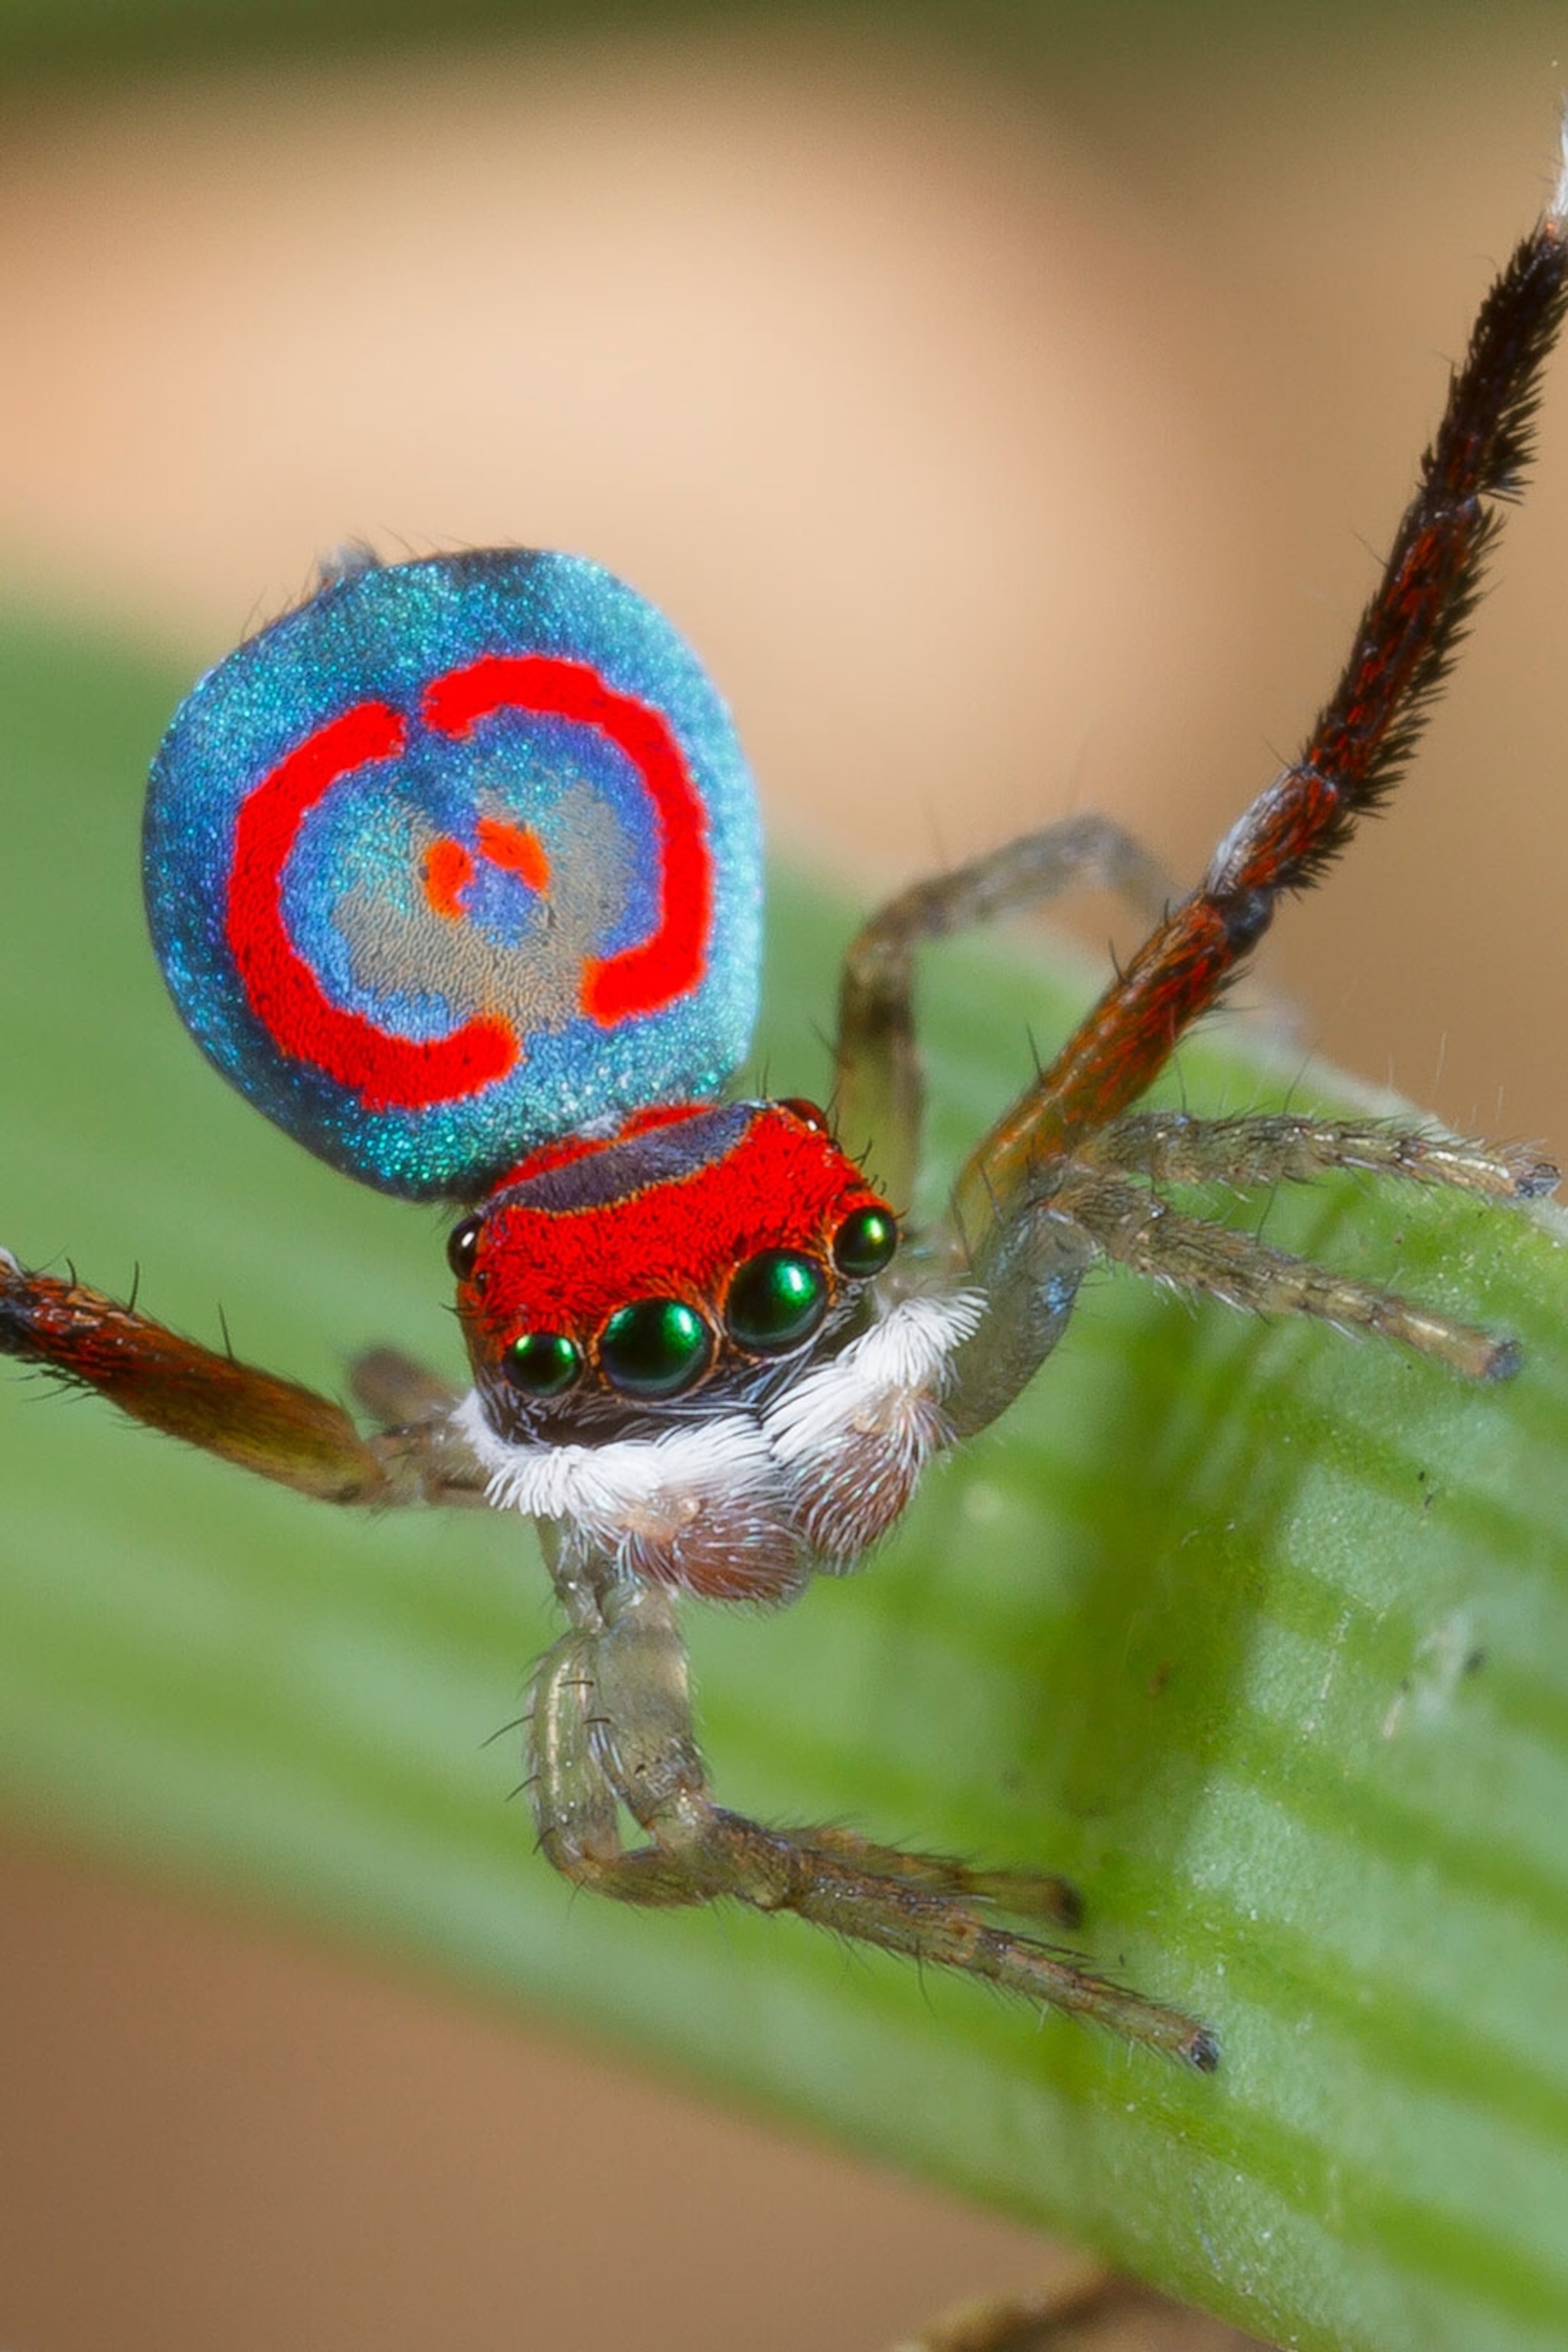 Why do peacock spiders have different coloured legs?